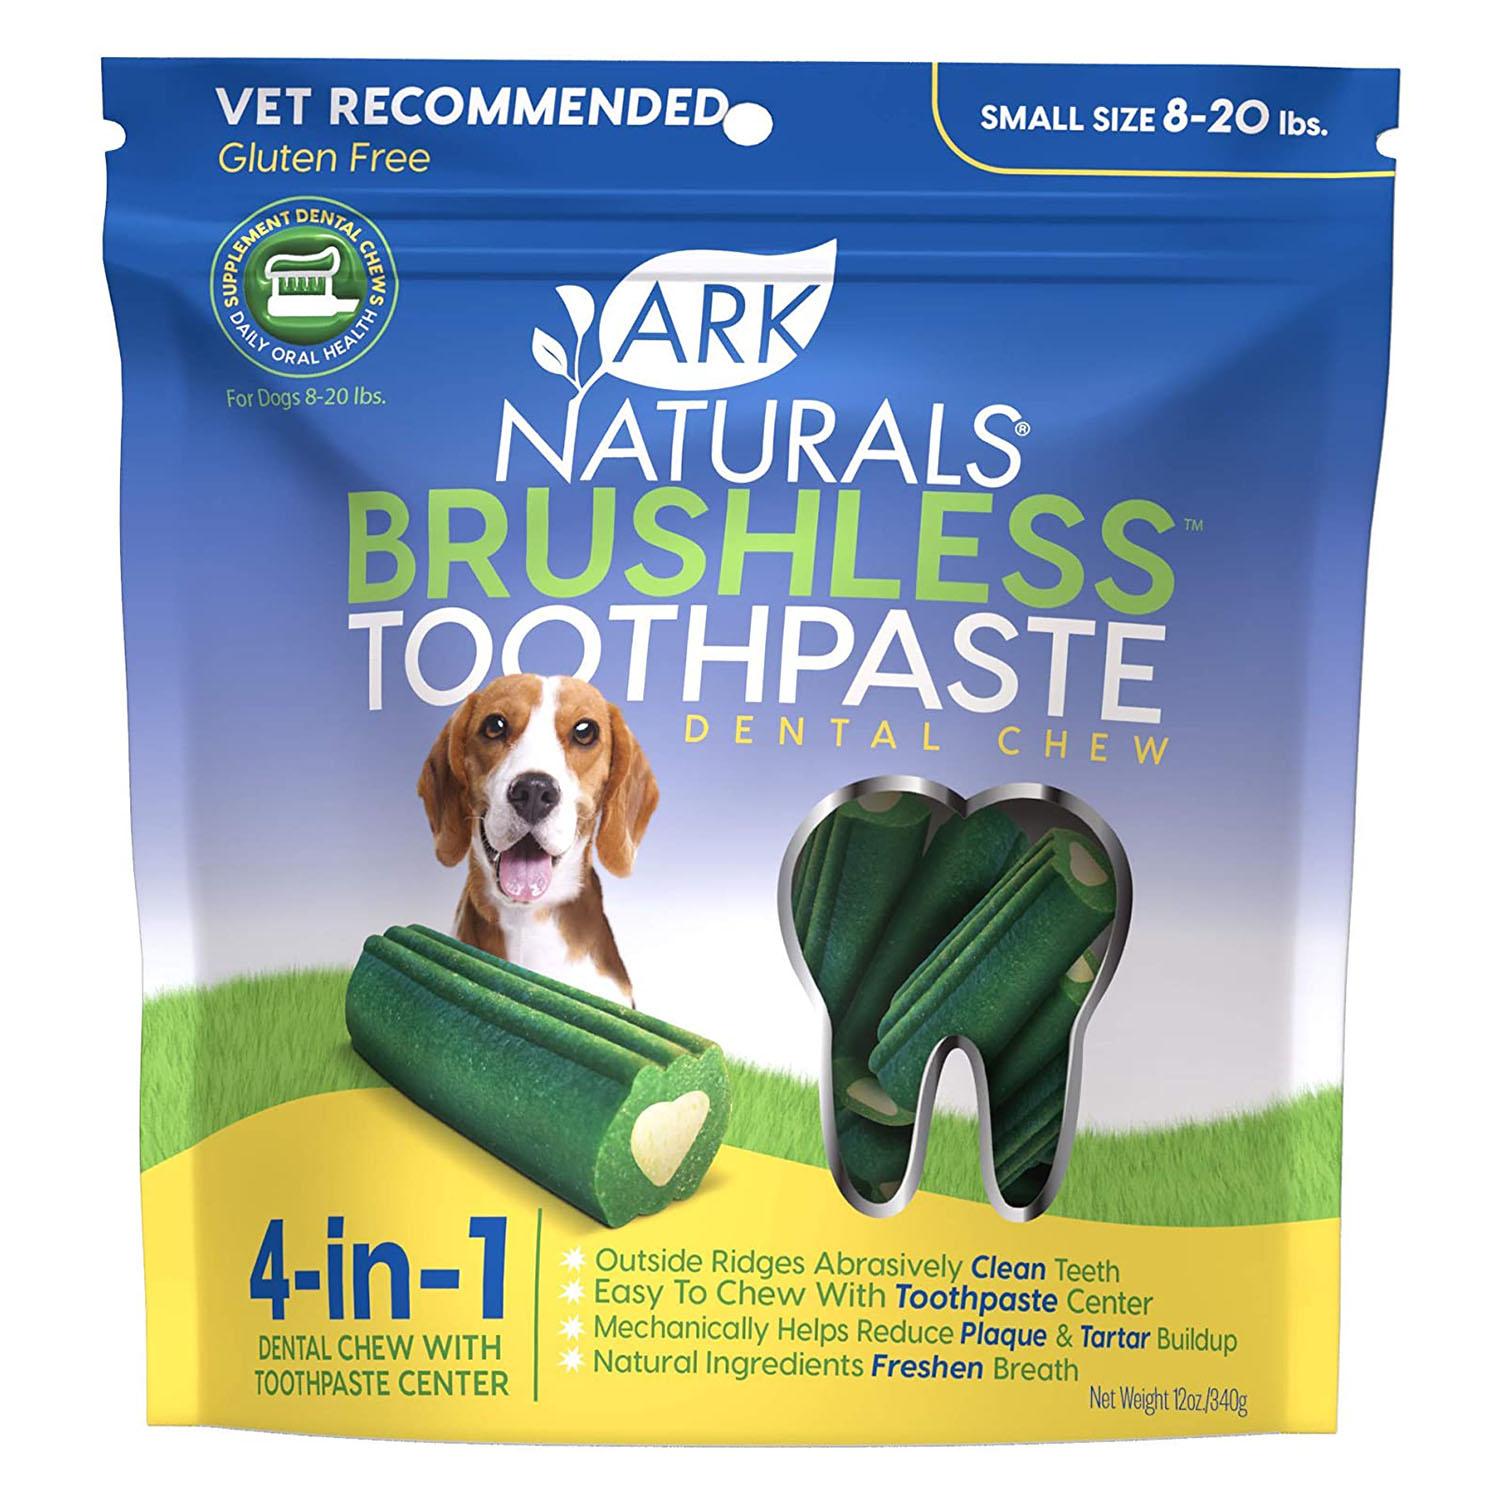 Ark Naturals Brushless Toothpaste Dog Chews